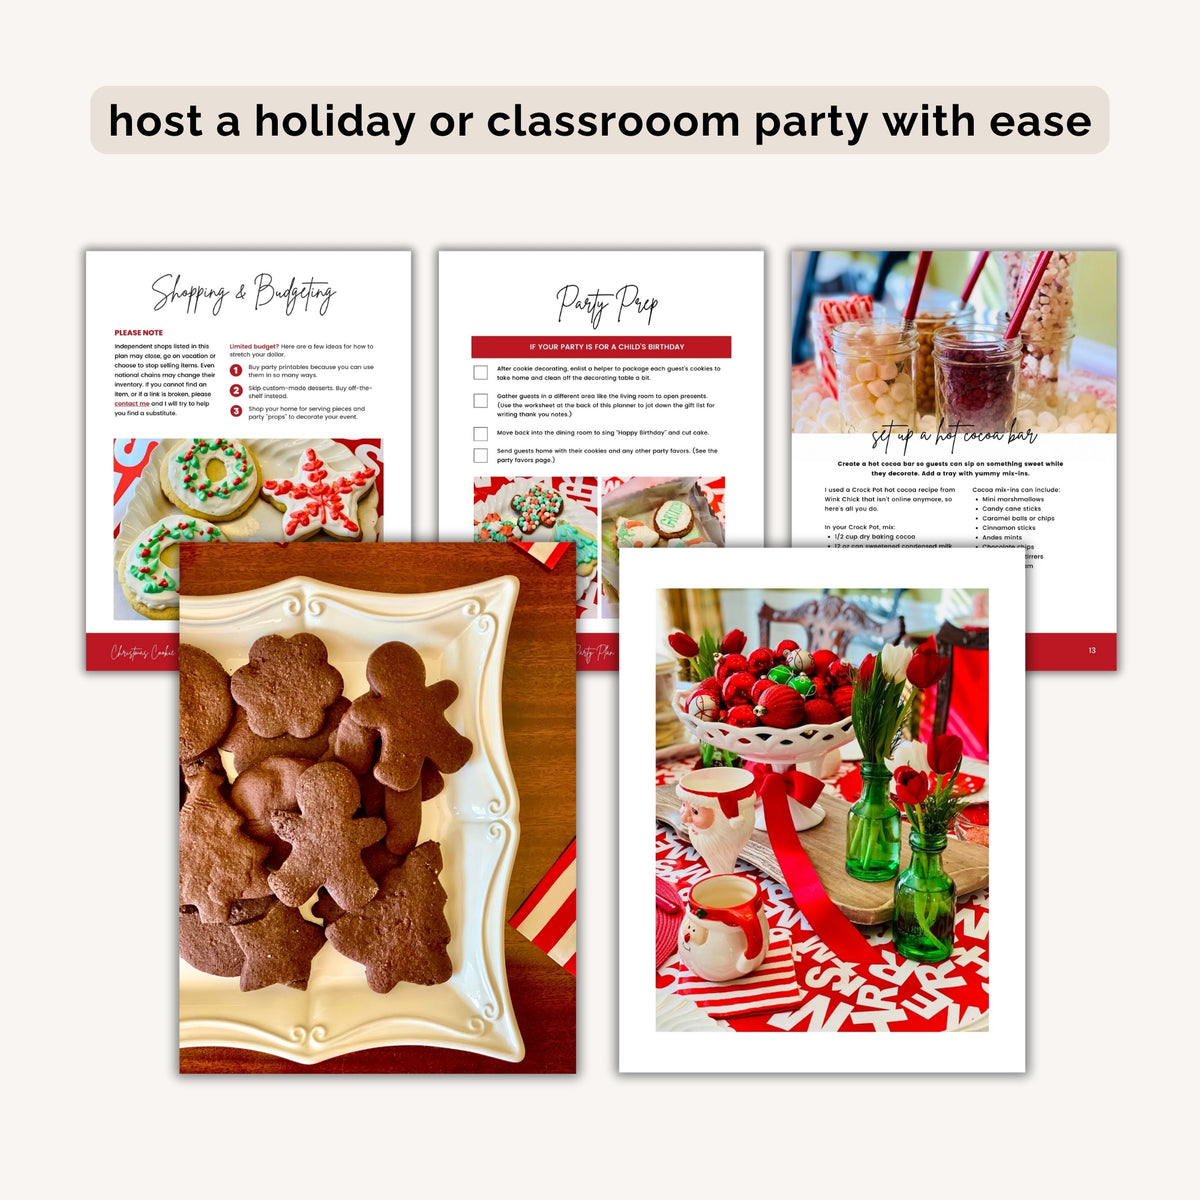 Christmas Cookie Decorating Party Planner INSTANT DOWNLOAD